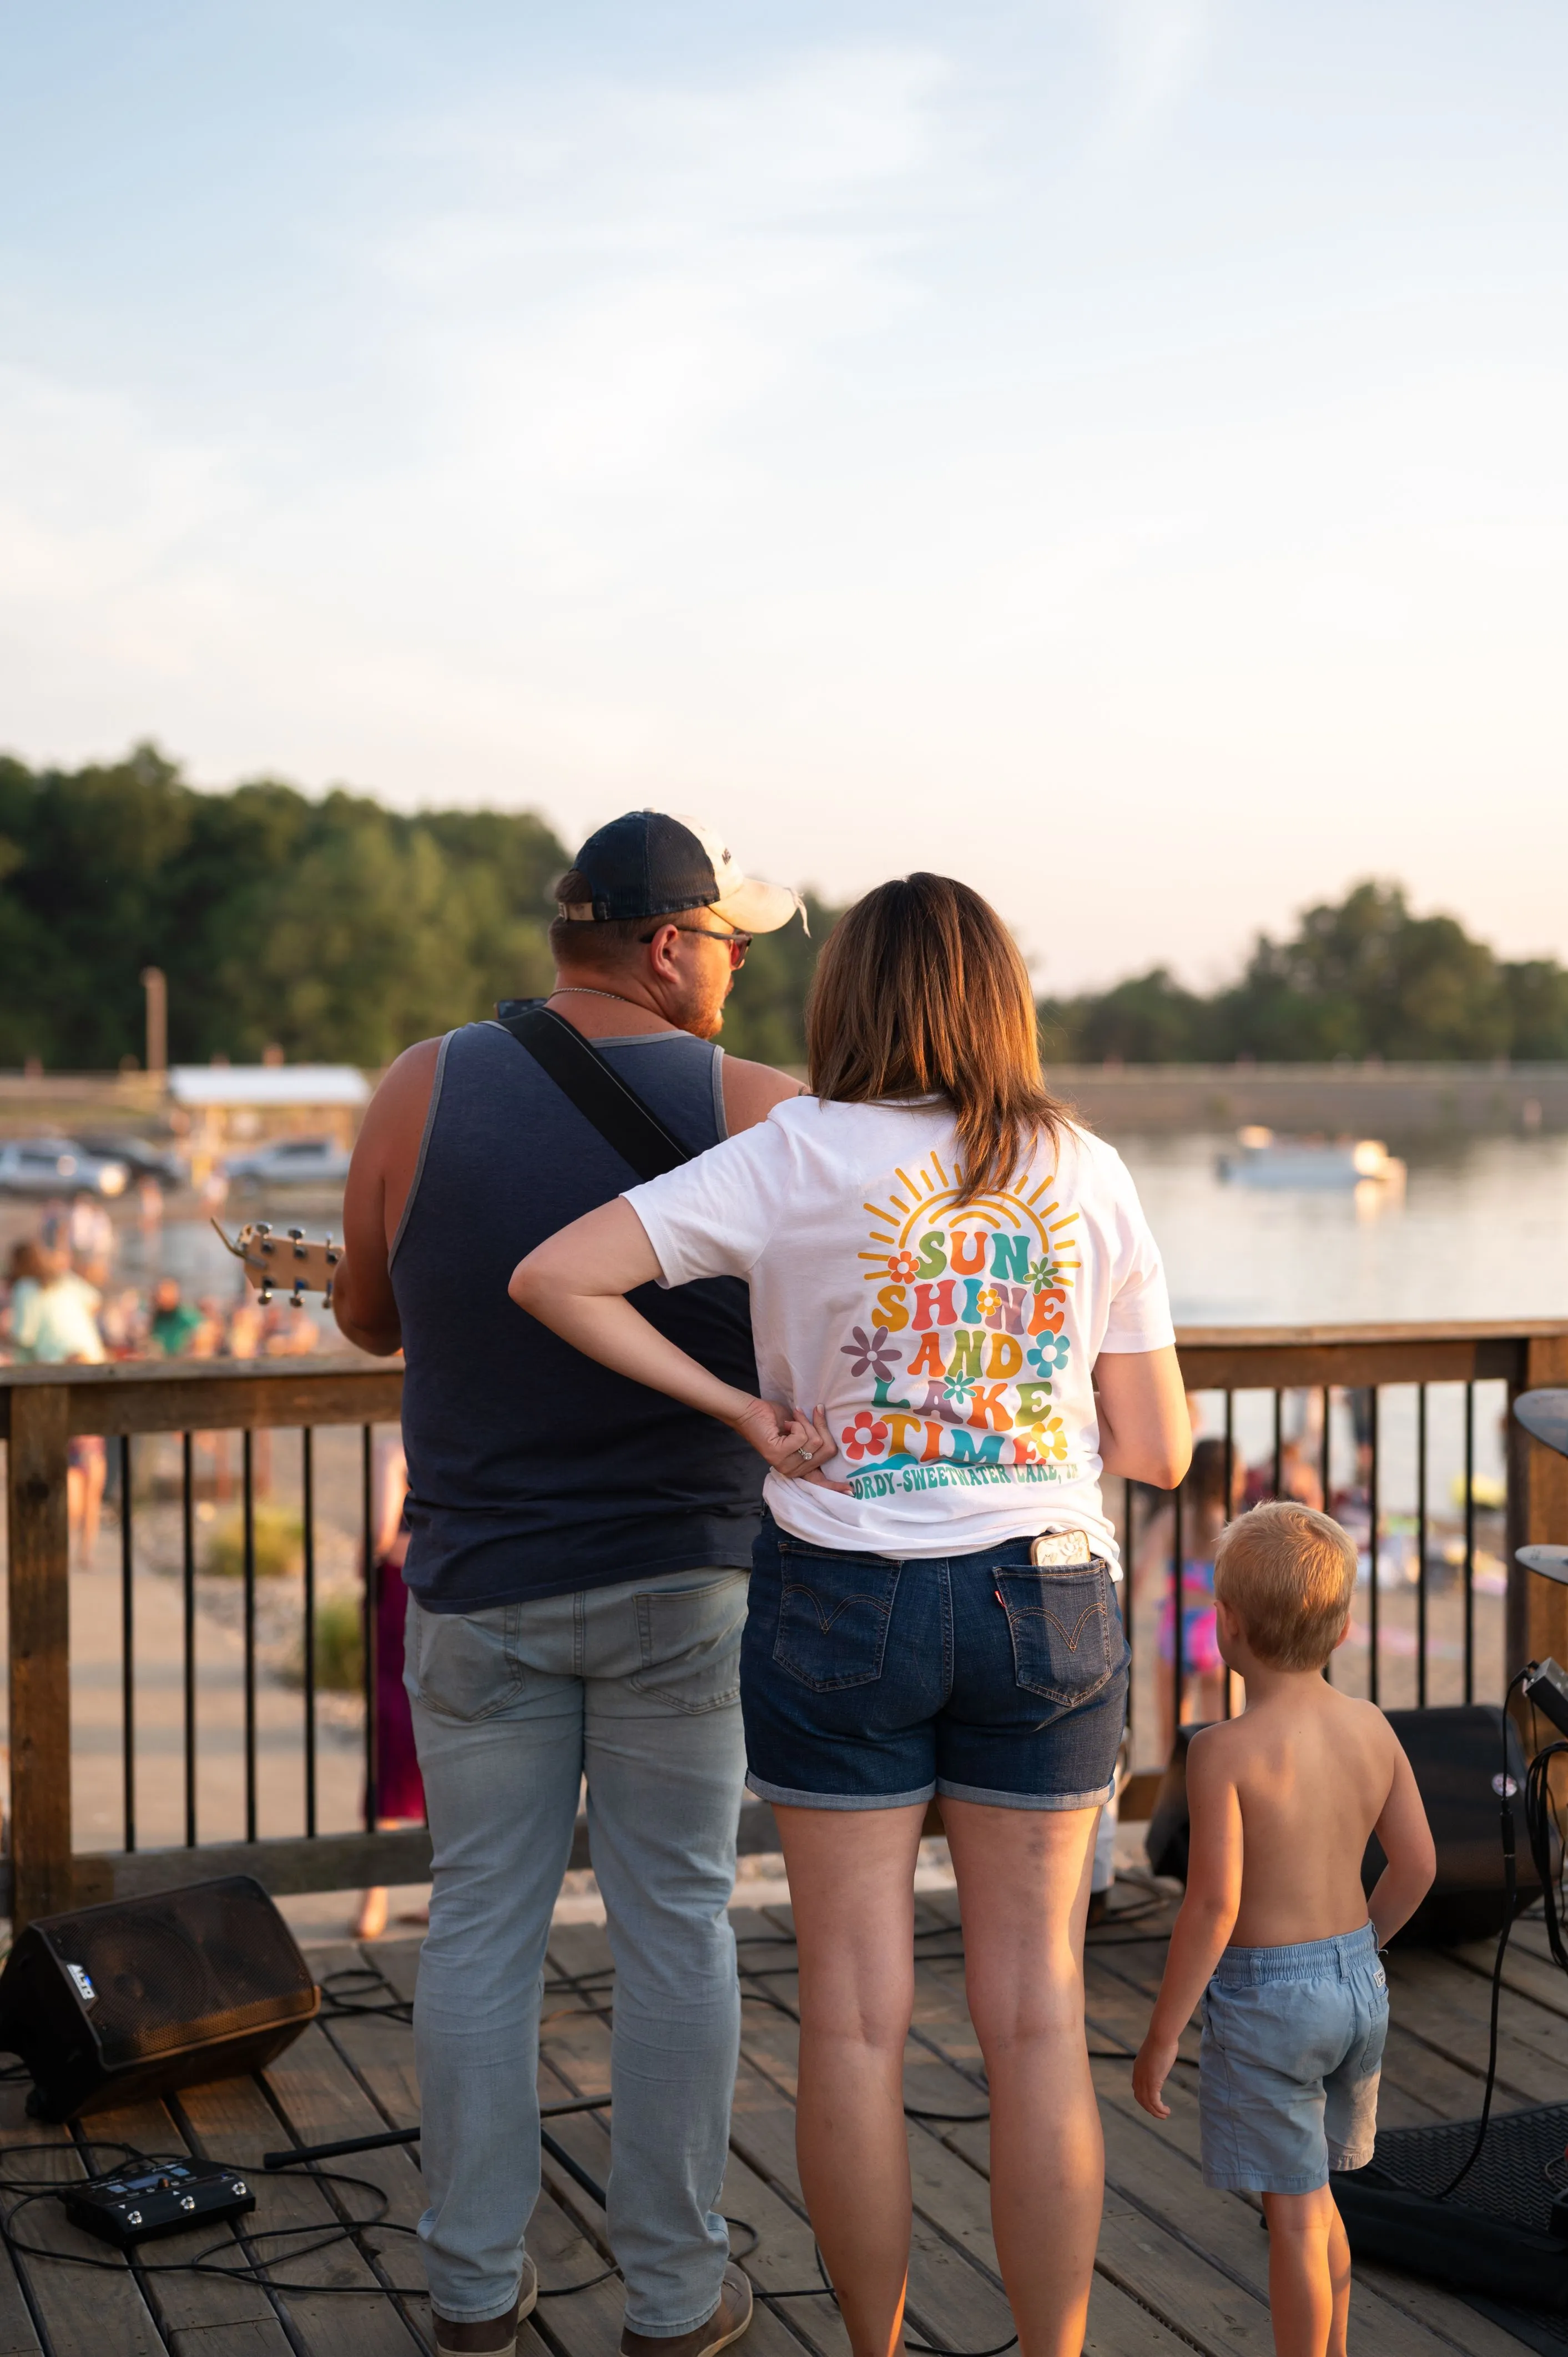 Two adults standing by a railing overlooking a body of water with a young child walking nearby.